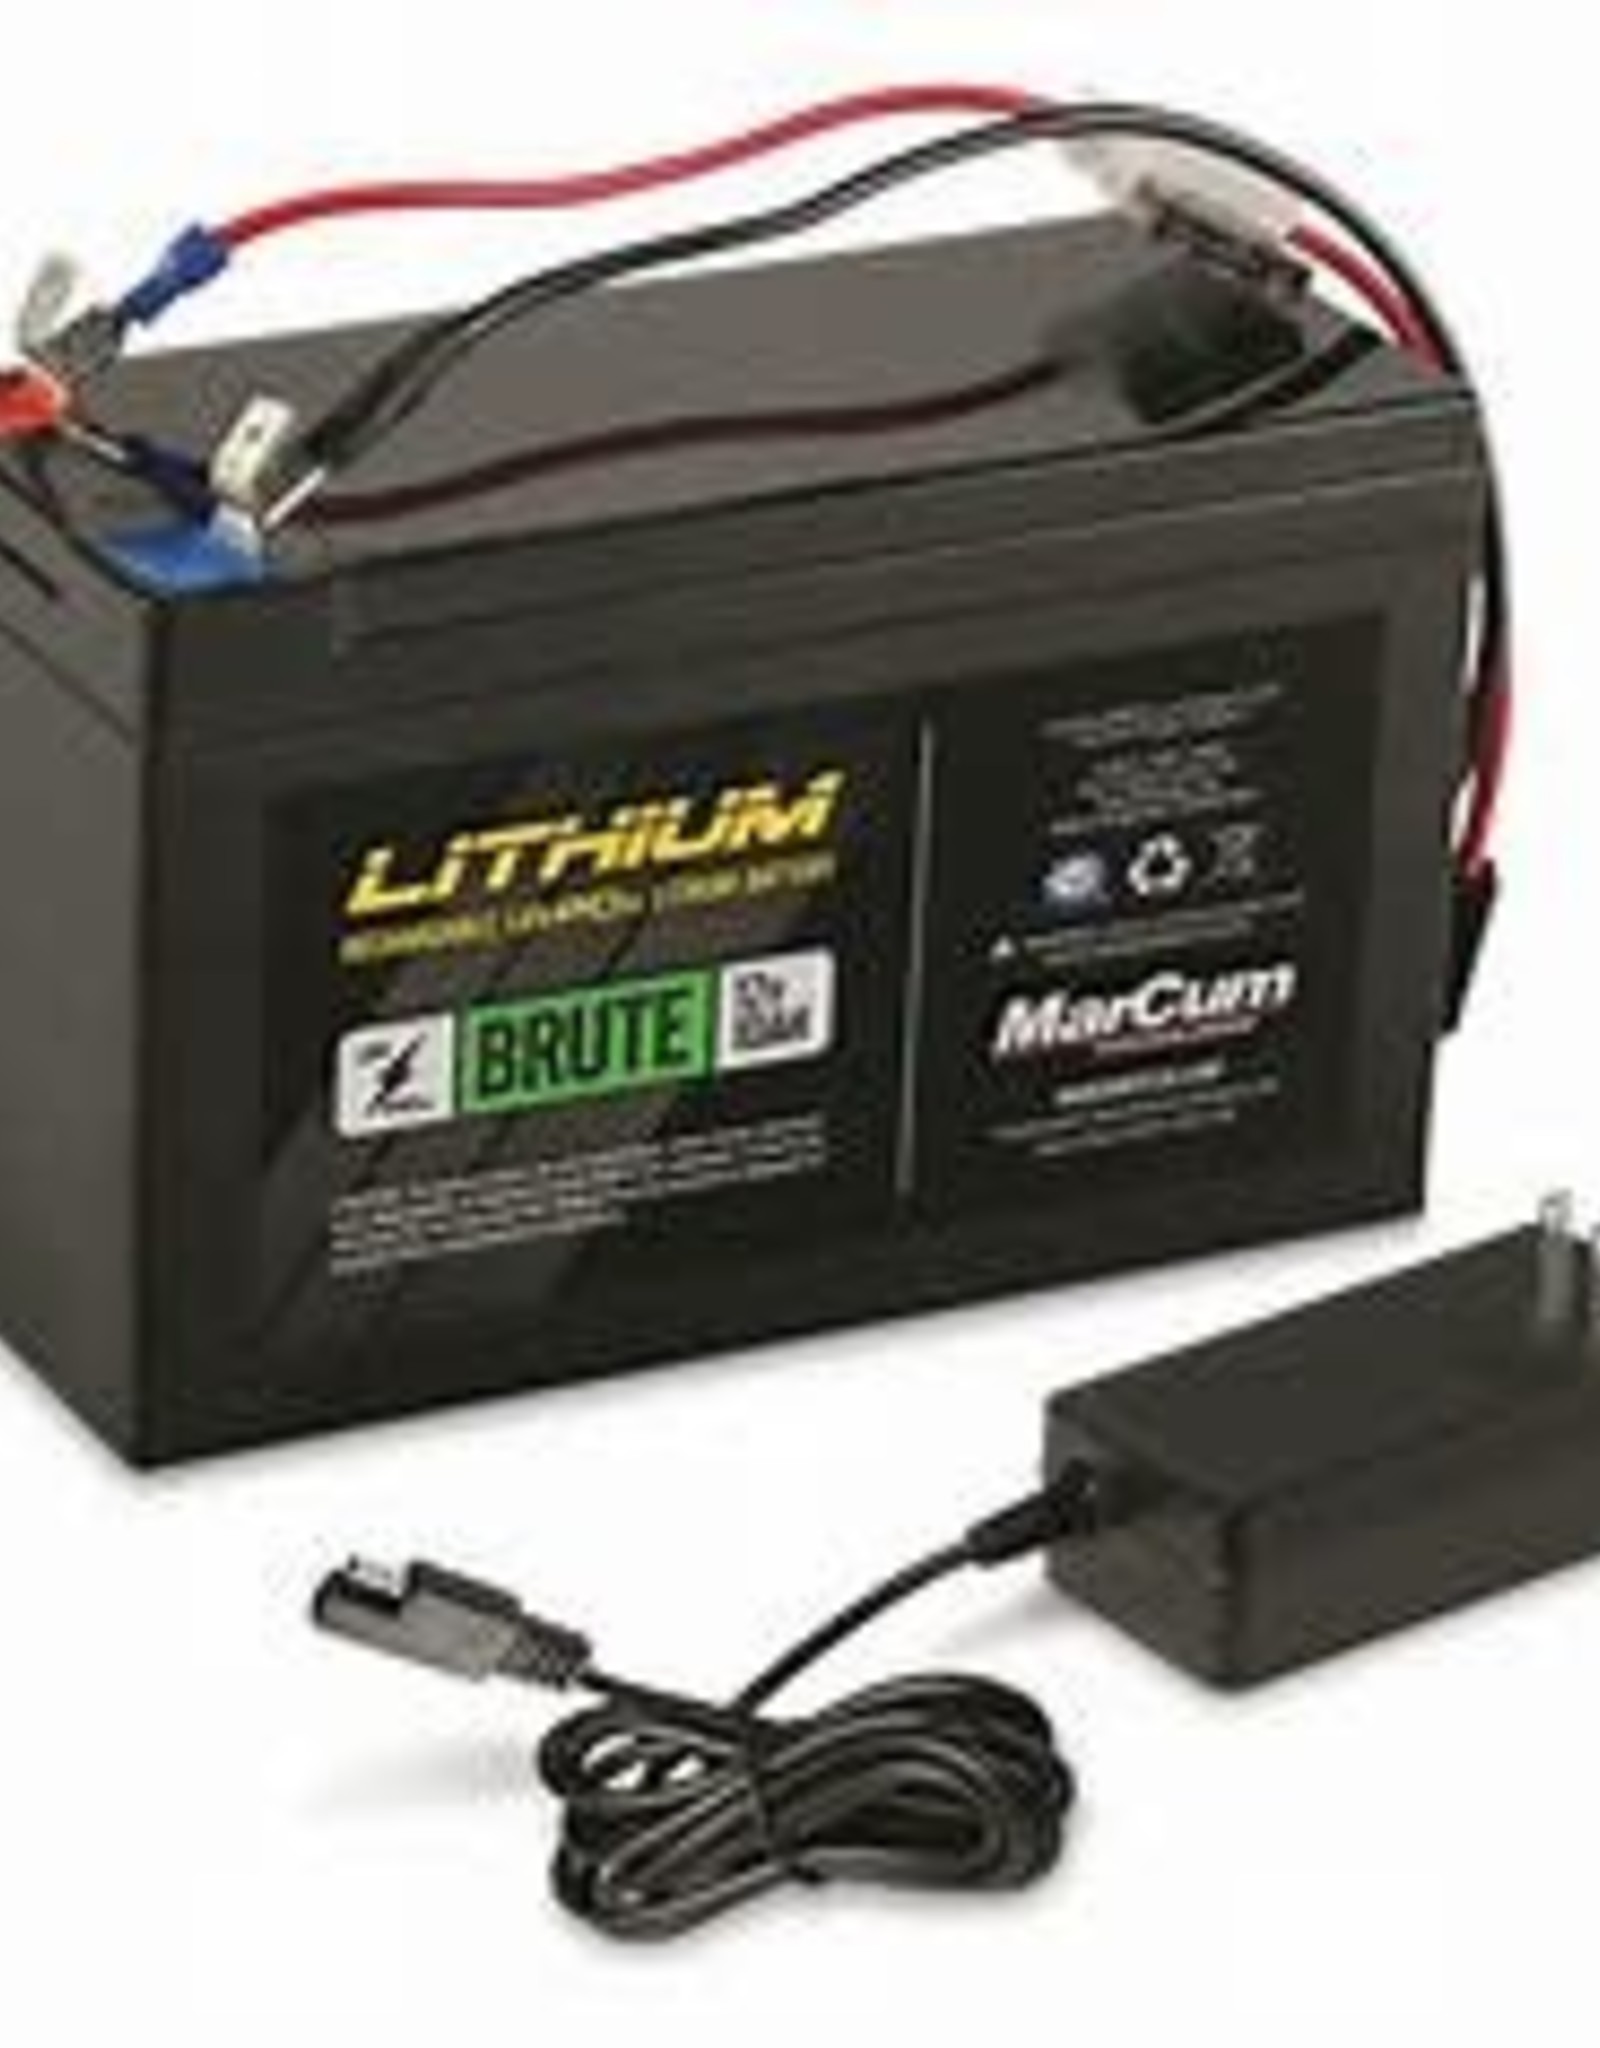 Marcum 12V 10AH LifePO4 Battery W/3 Amp Charger